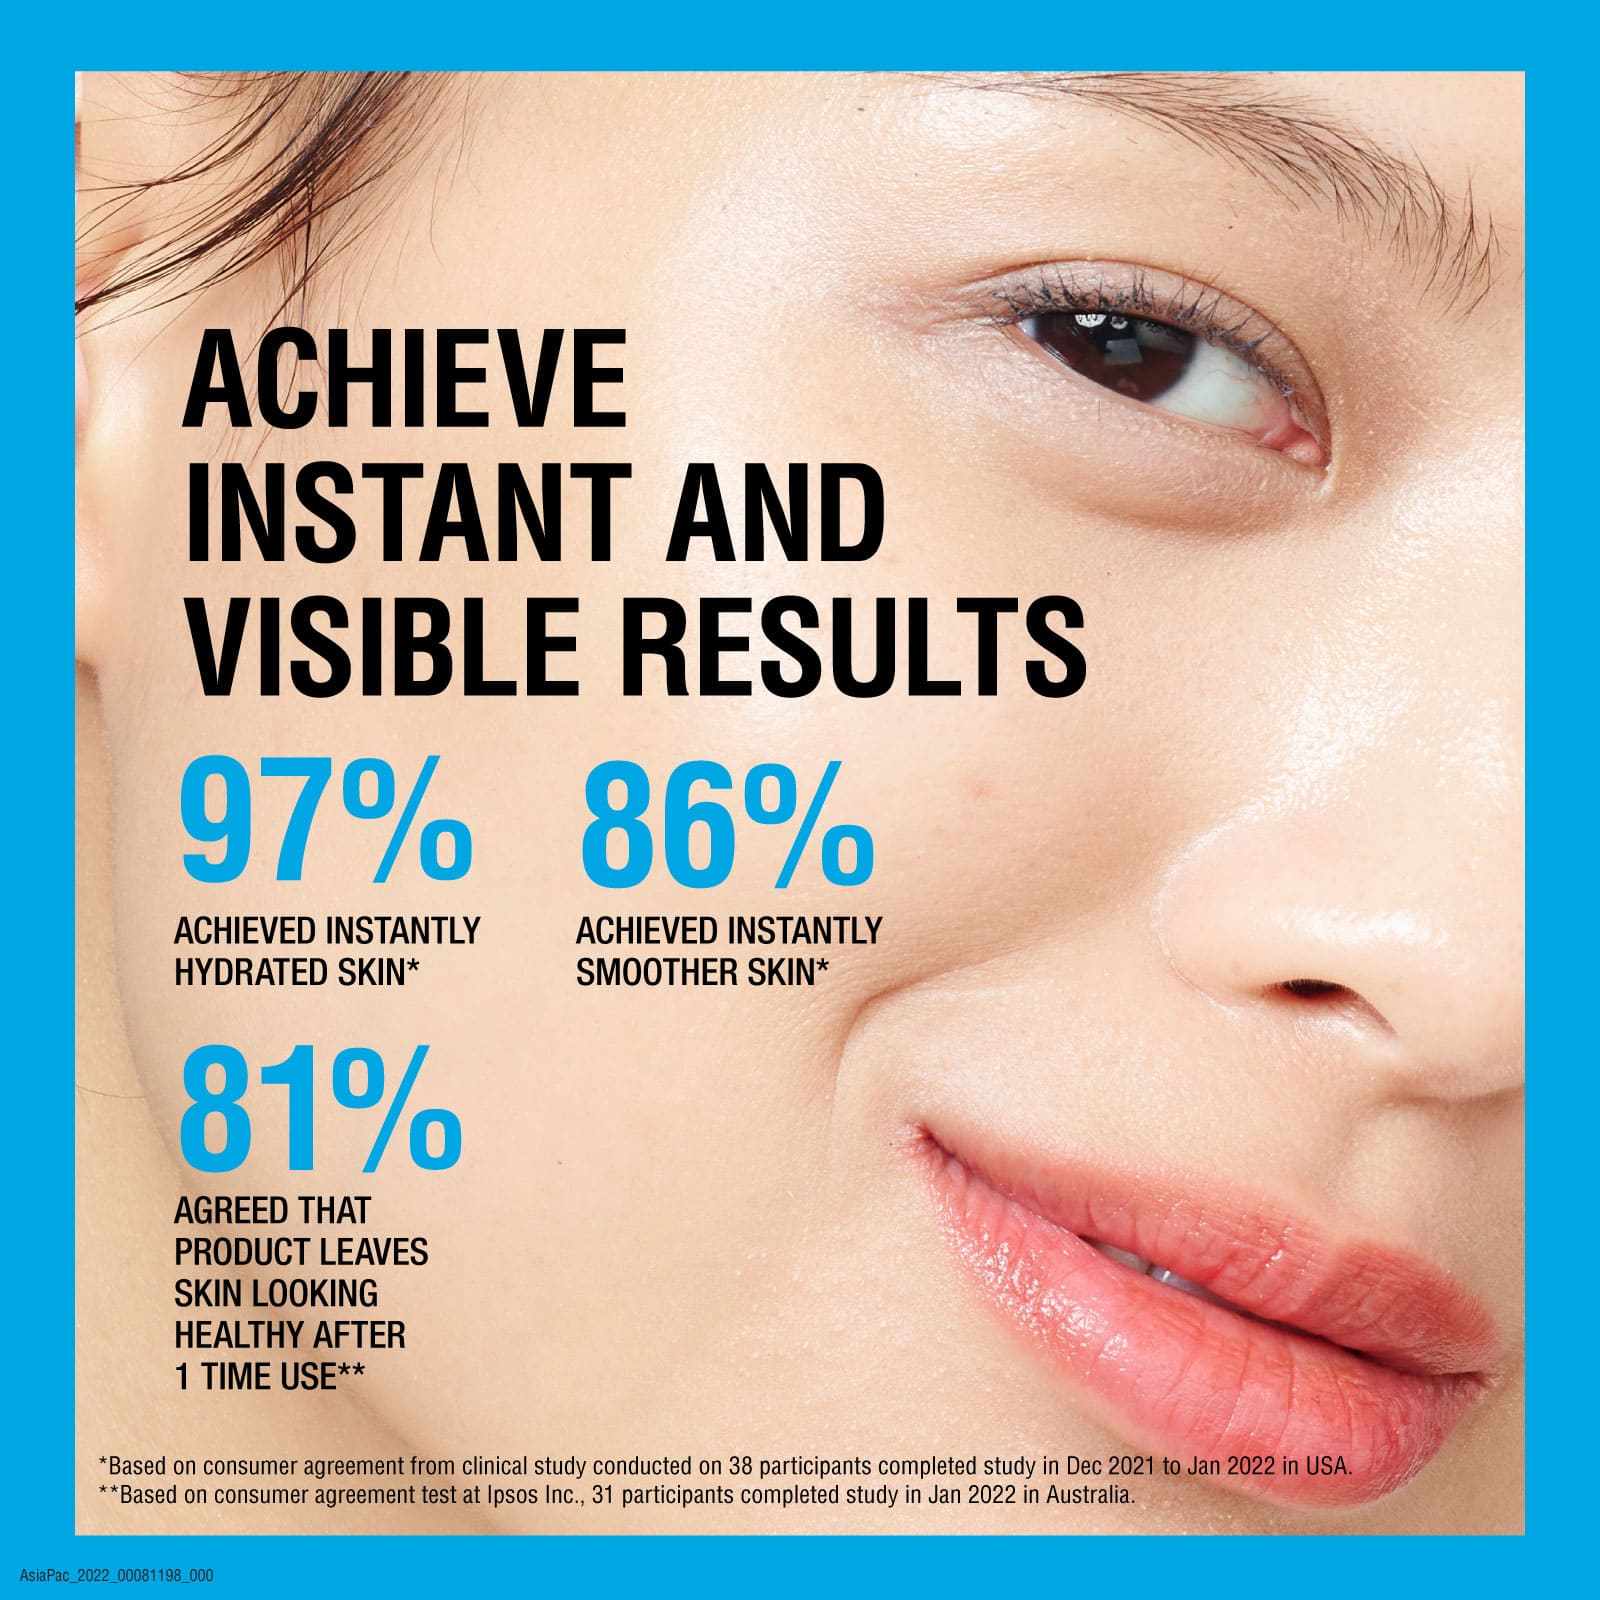 ACHIEVE INSTANT AND VISIBLE RESULTS 97% ACHIEVED INSTANTLY HYDRATED SKIN* 86% achieved instantly smoother skin* 81% agreed that product leaves skin looking healthy after 1 time use**  *Based on consumer agreement from clinical study conducted on 38 partic